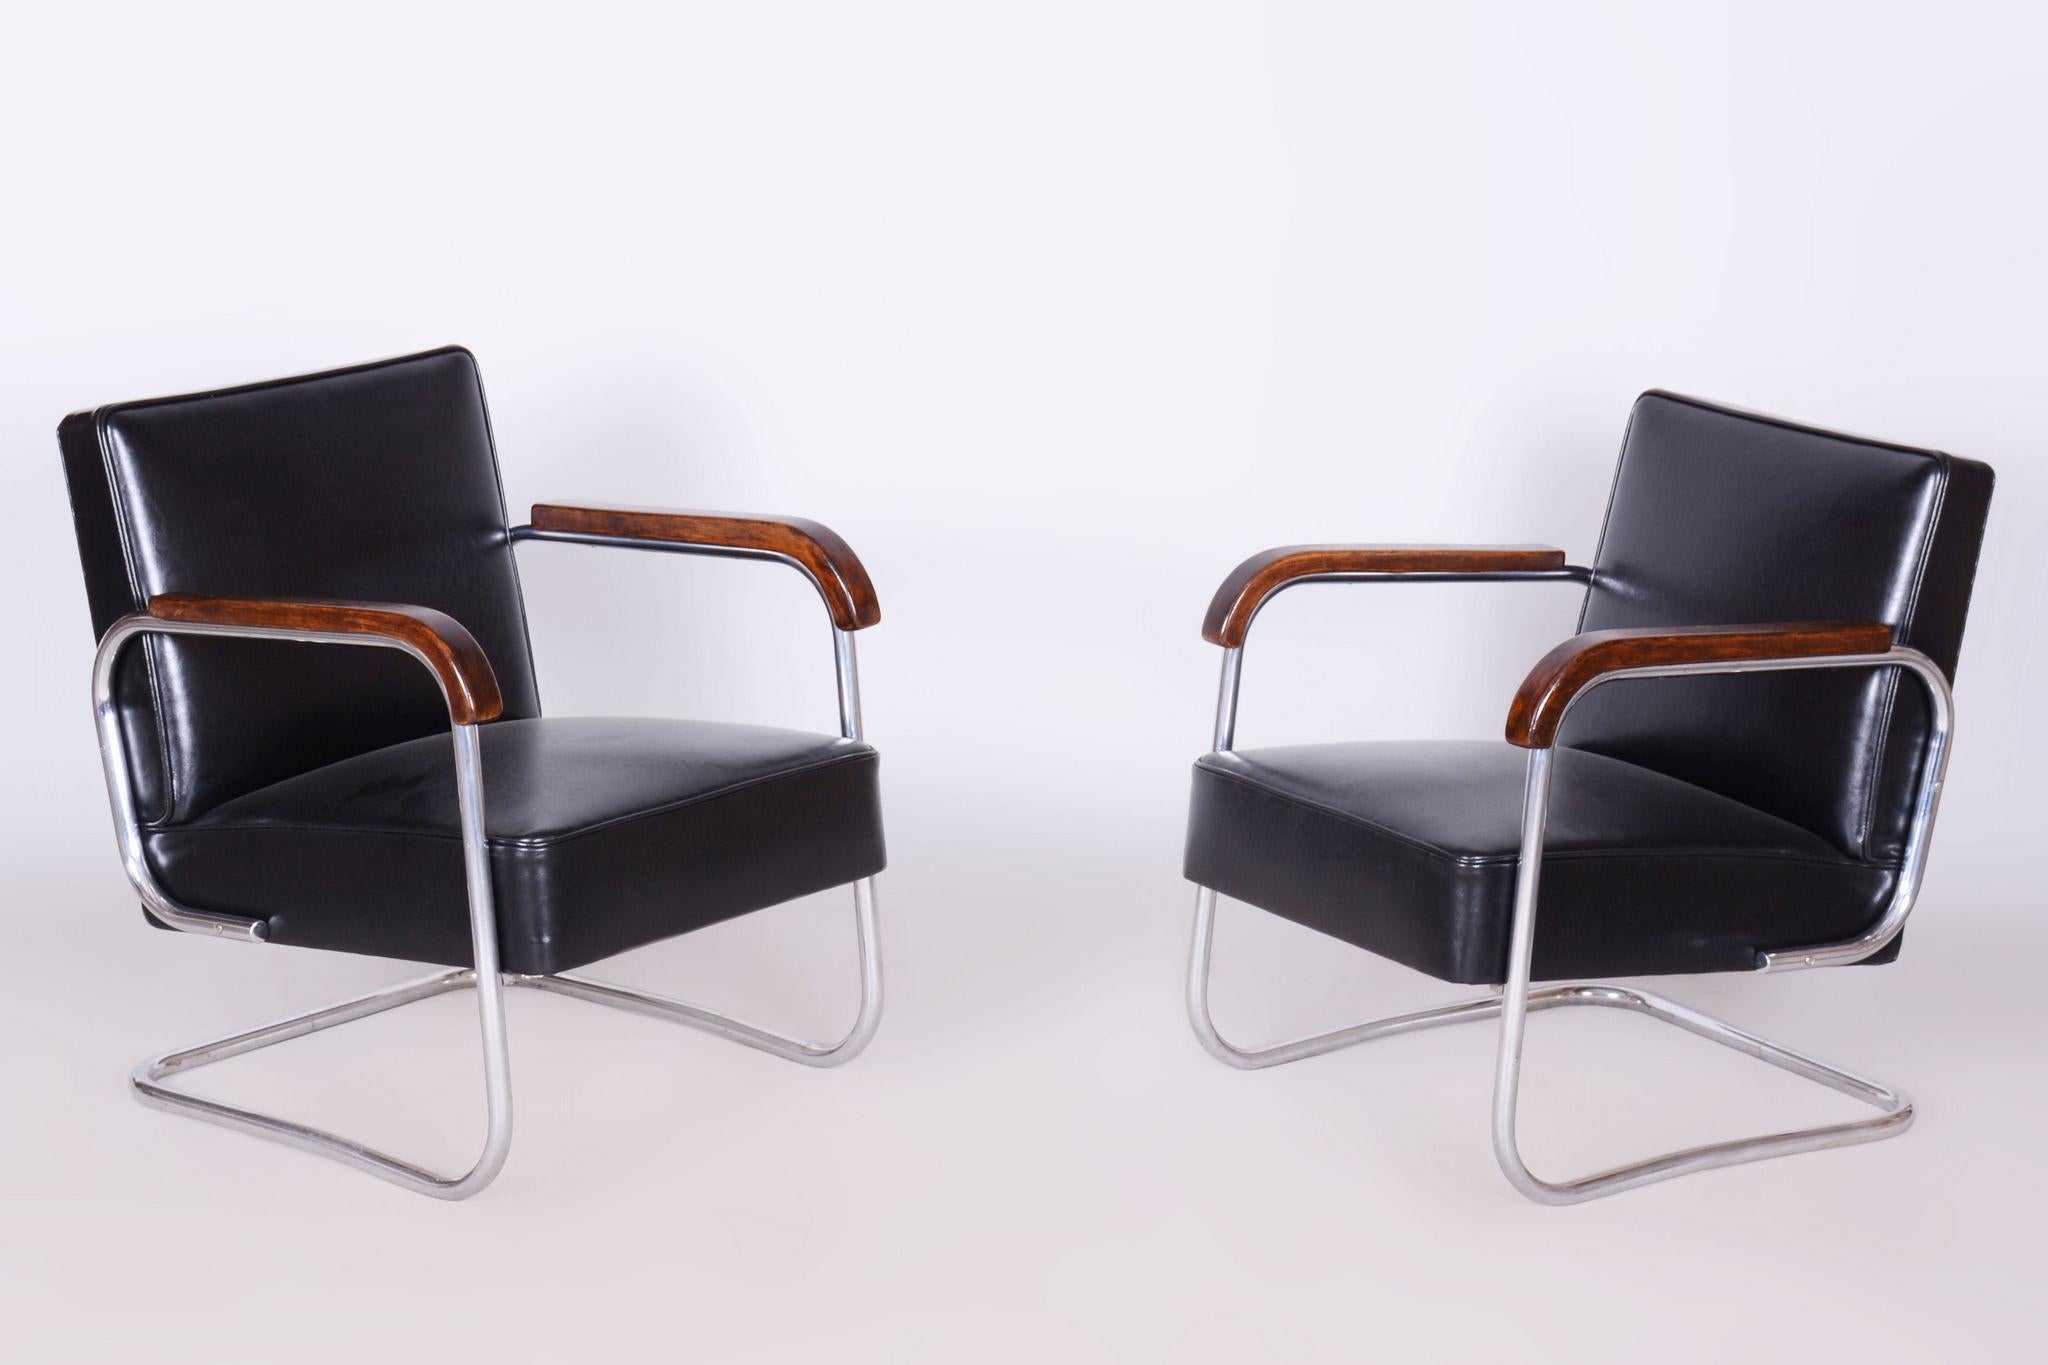 Restored Bauhaus Pair of Armchairs.

Source: Czechia (Czehoslovakia)
Period: 1930-1939
Material: Chrome-plated Steel, Cowhide, Beech

It has been re-polished with polyutherane piano lacquer by our professional refurbishing team in Czechia according